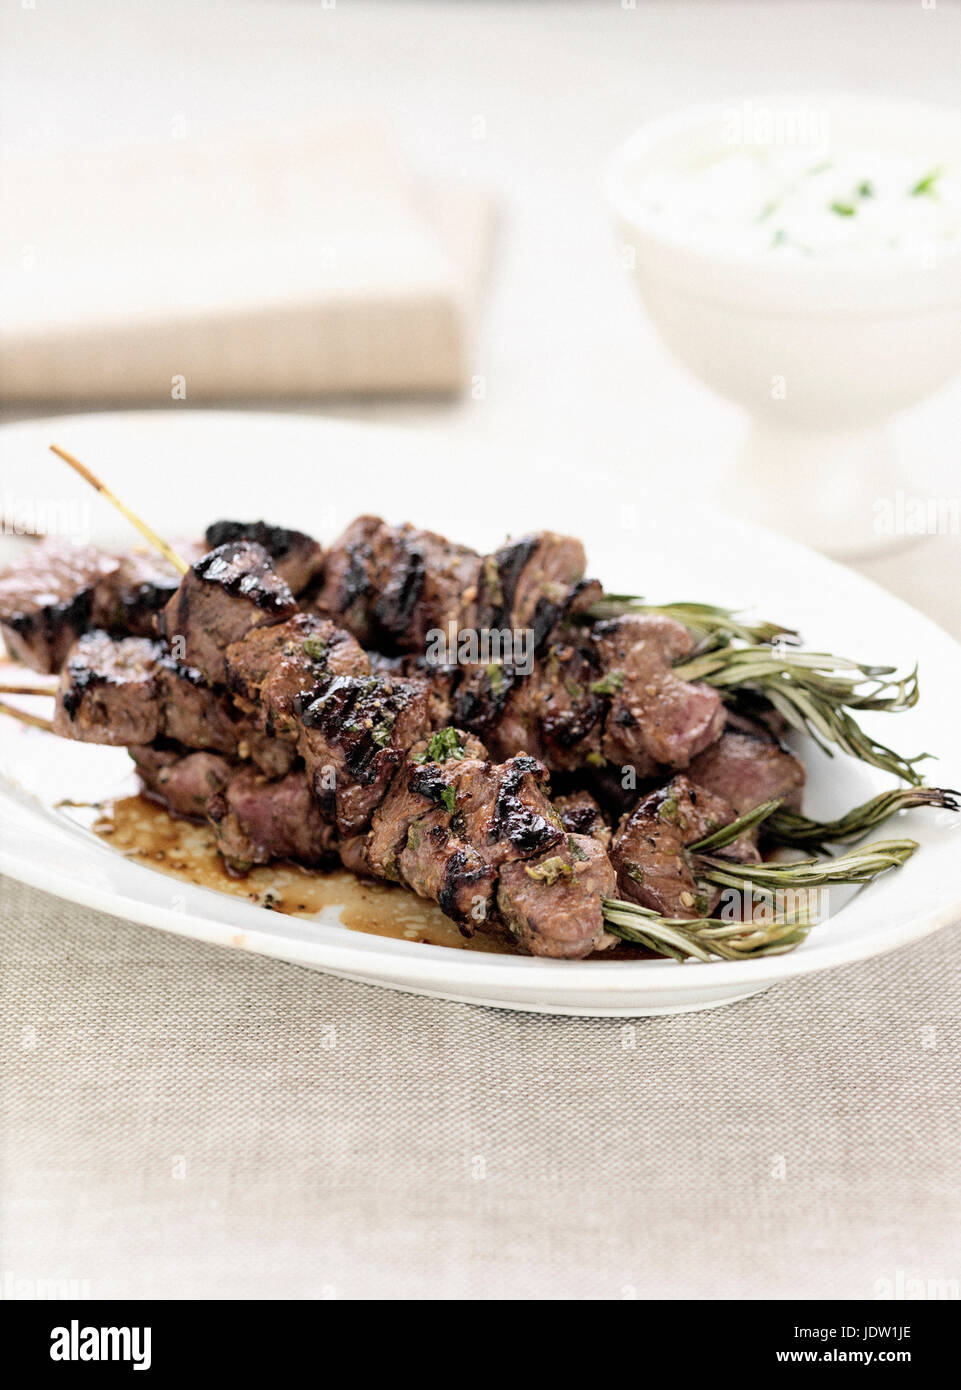 Plate of meat kebabs and herbs Stock Photo